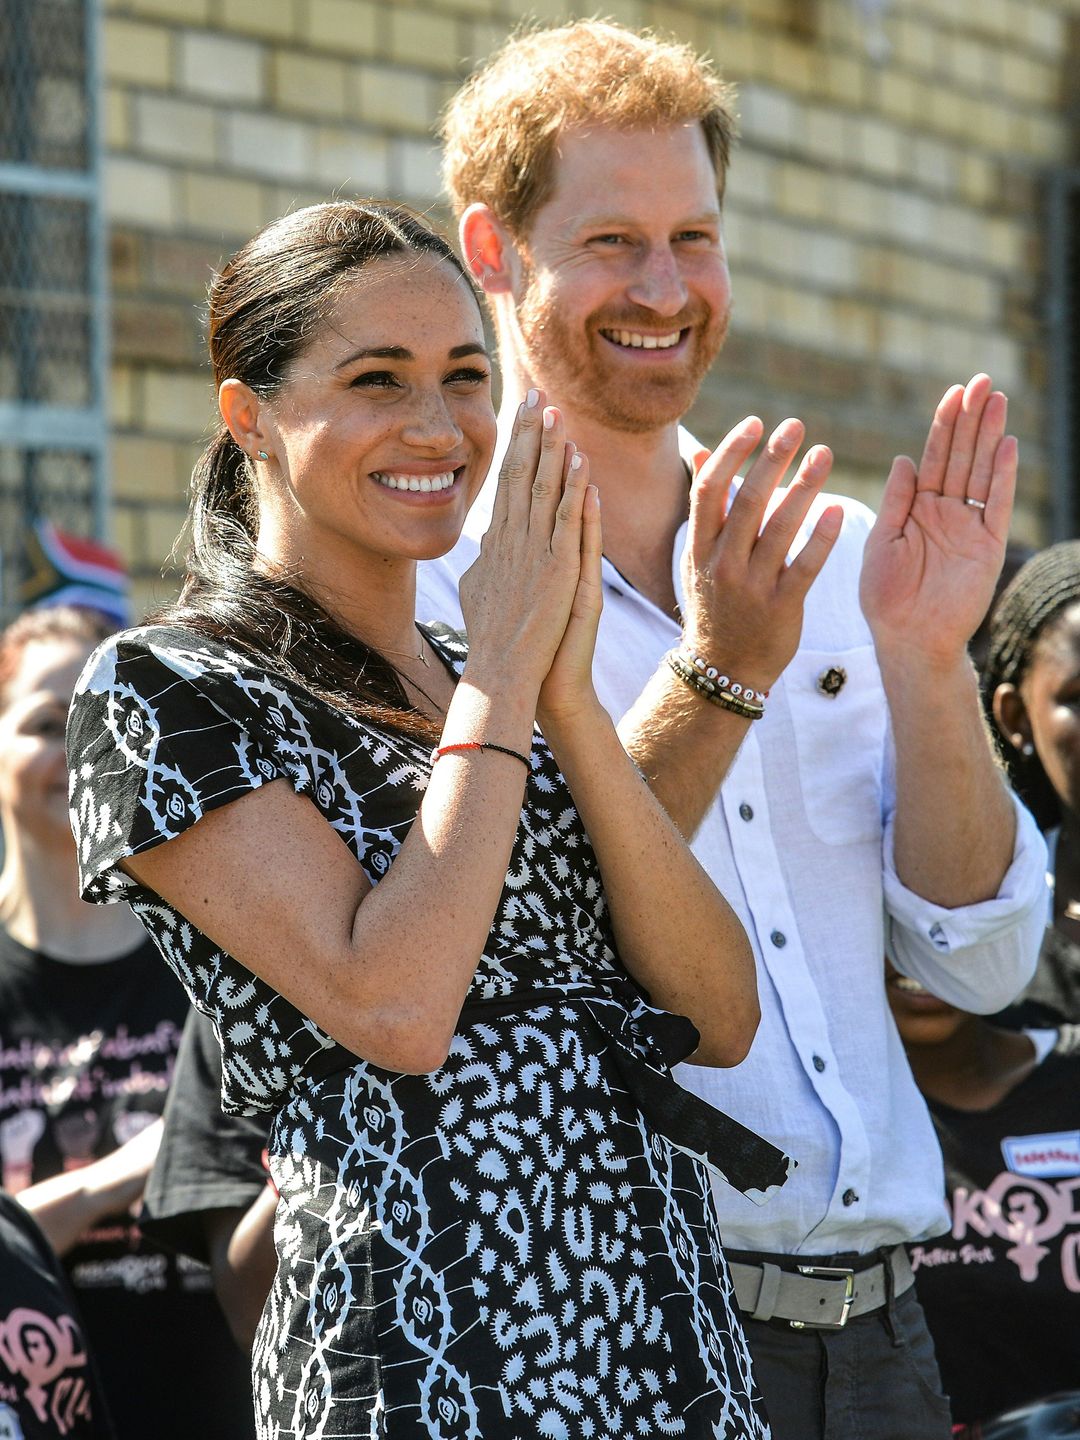 Prince Harry and Meghan laughing and clapping at an event